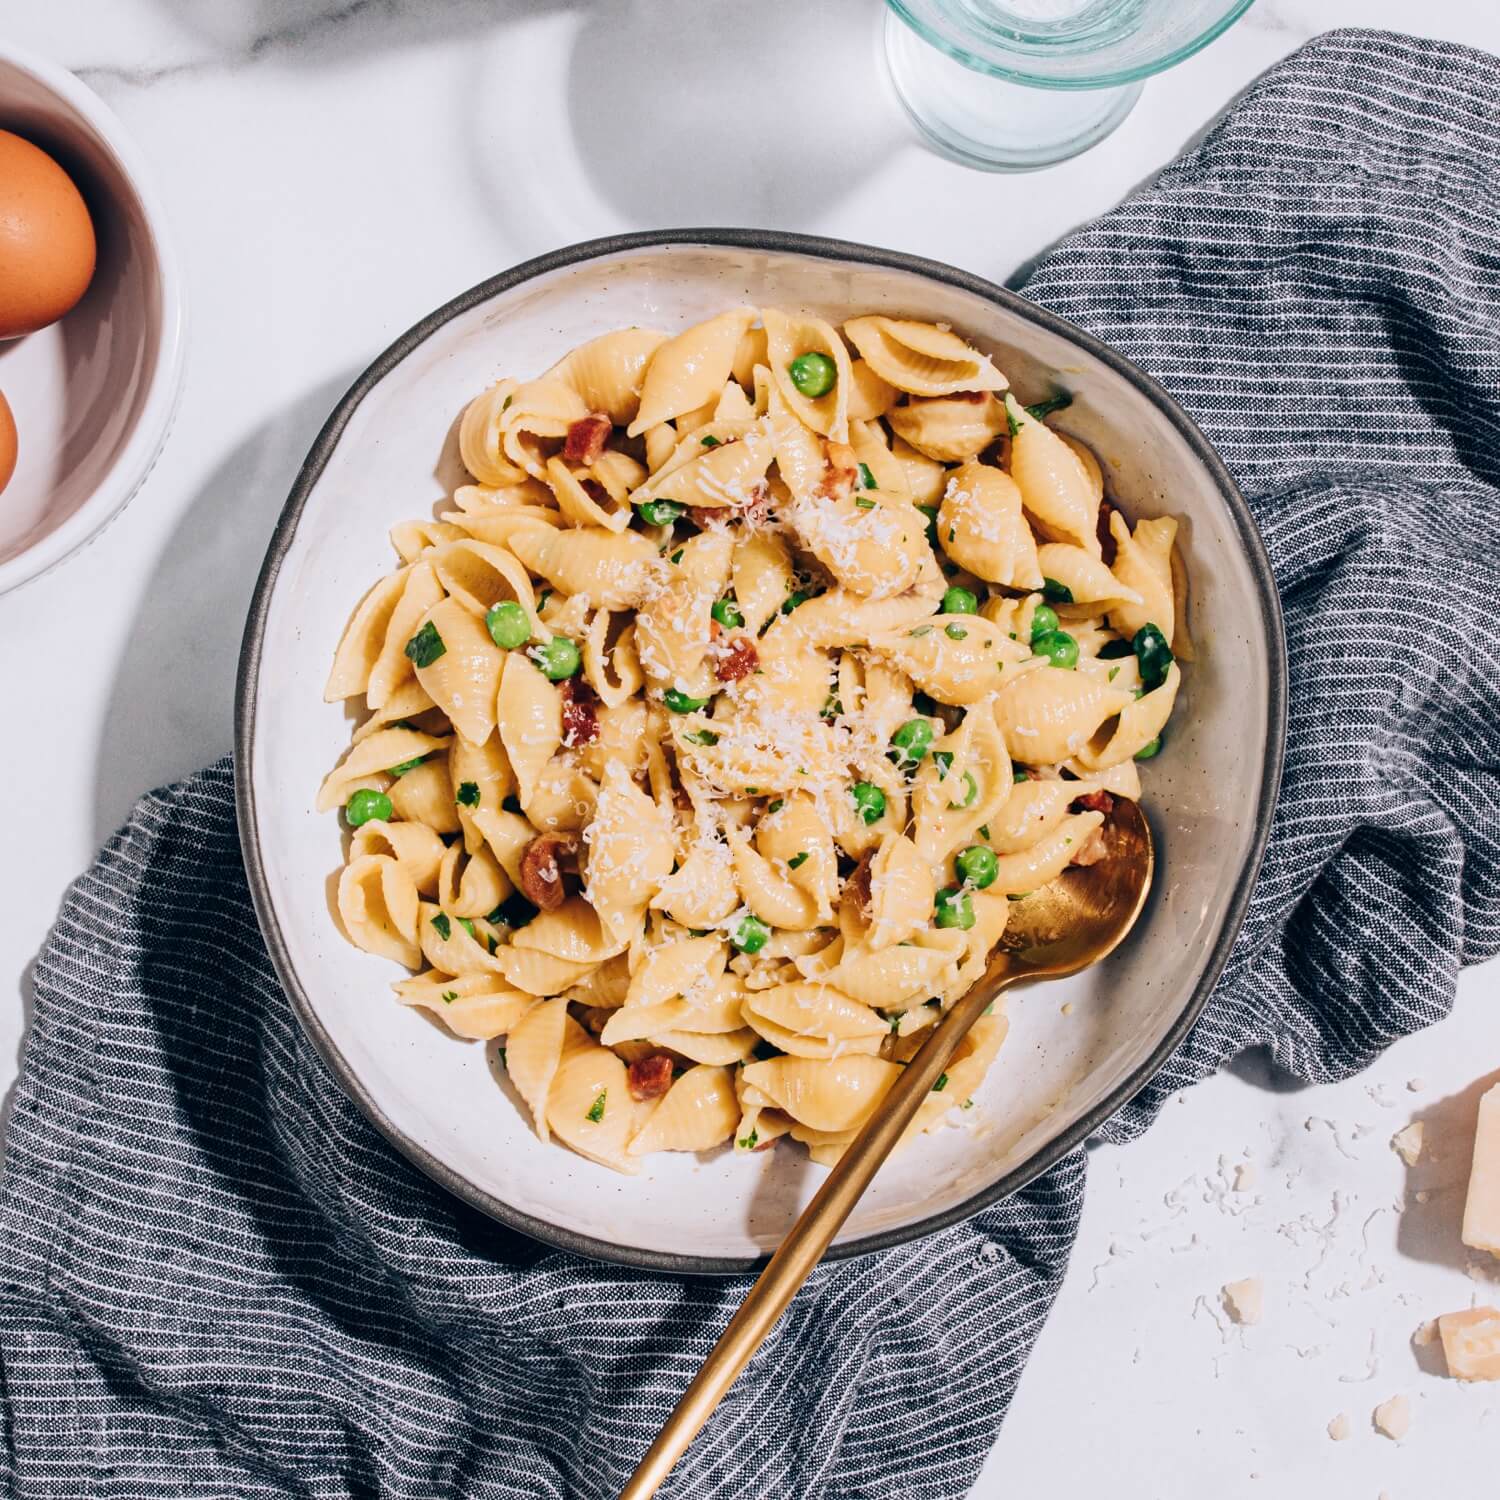 carbonara pasta salad with shells and peas in serving bowl